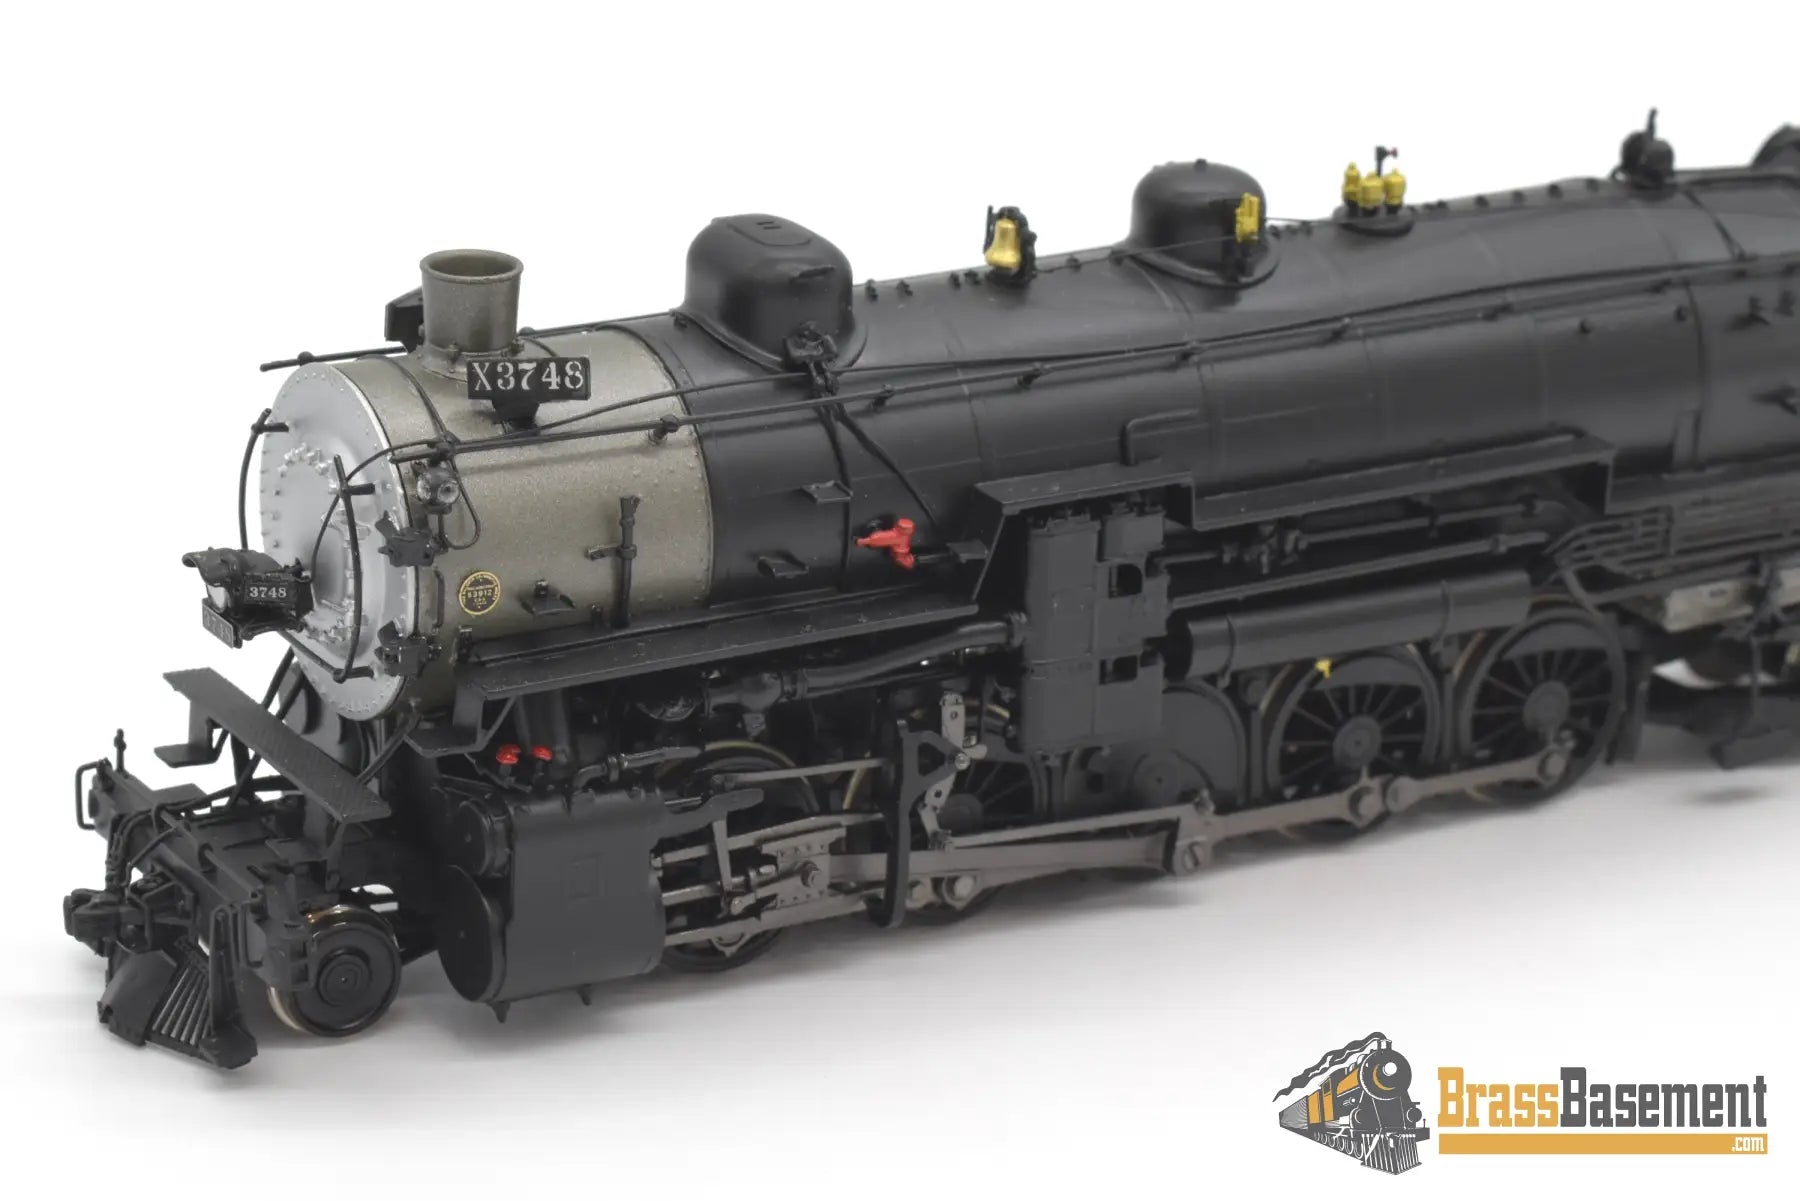 Ho Brass - Gpm 3748.2 Southern Pacific F - 5 2 - 10 - 2 #3748 Factory Paint 252 - R - 1 Tender!